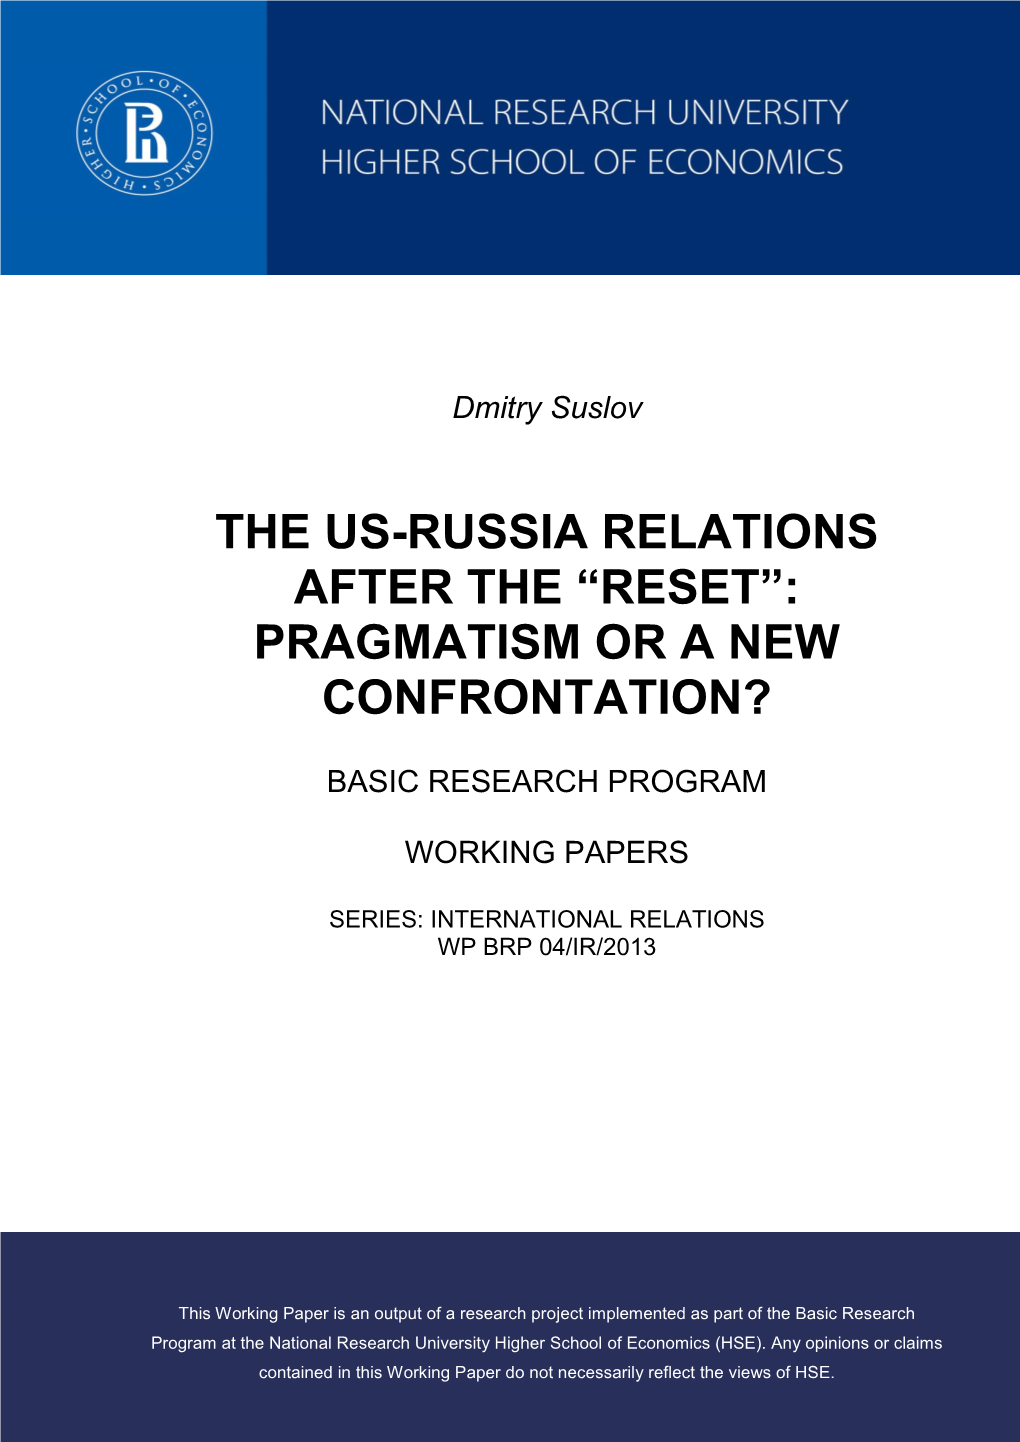 The Us-Russia Relations After the “Reset”: Pragmatism Or a New Confrontation?